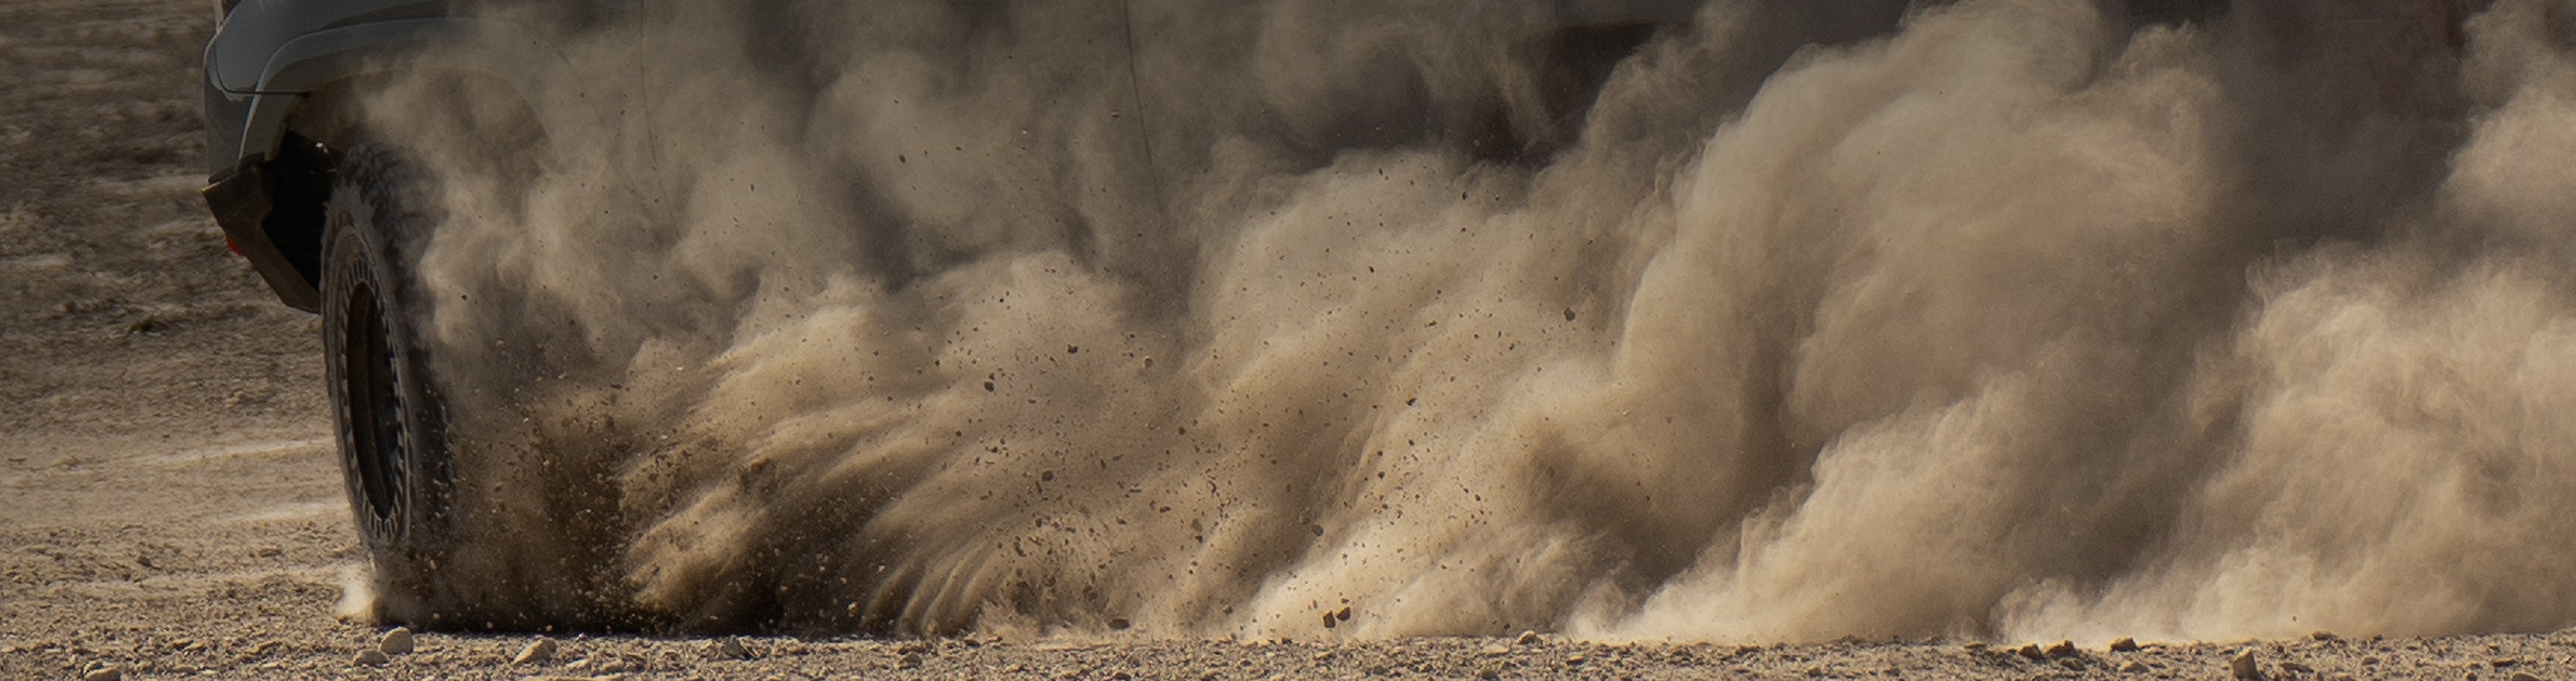 4runner off-road dusty driving fast utah desert photography by david friday